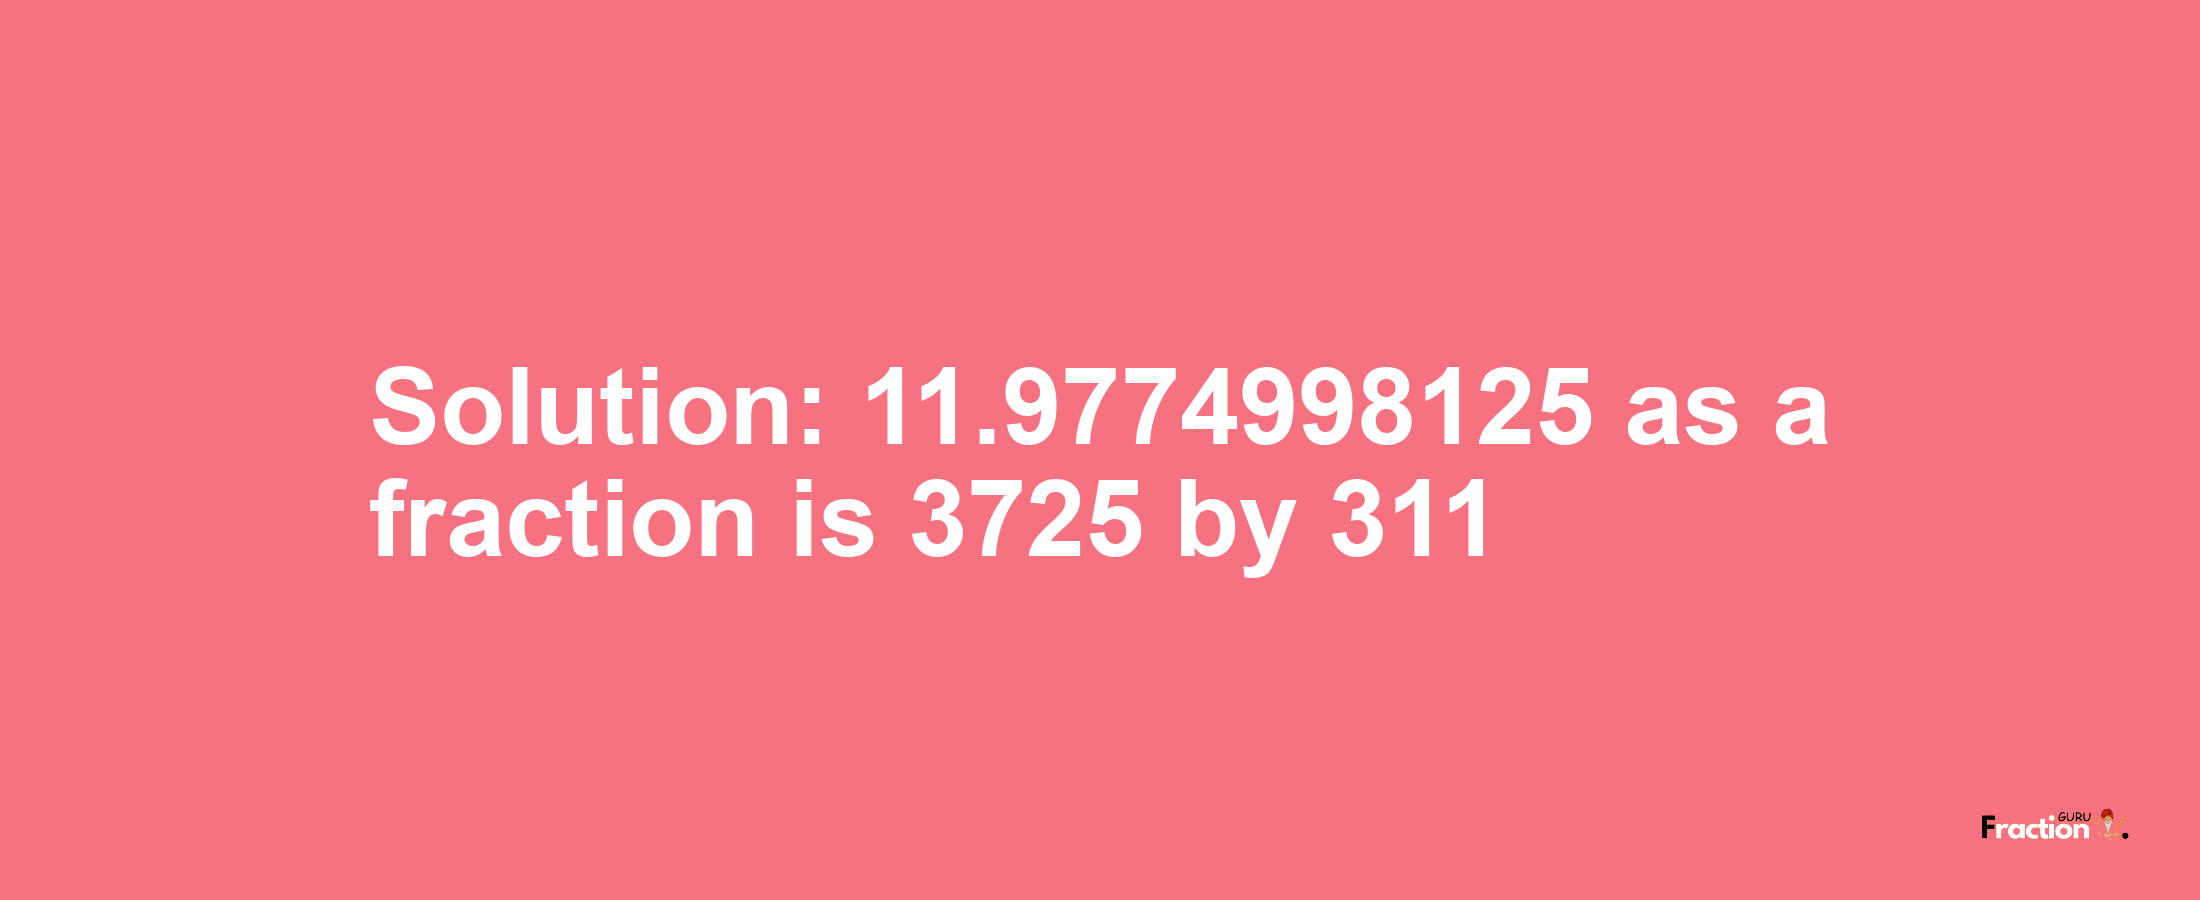 Solution:11.9774998125 as a fraction is 3725/311